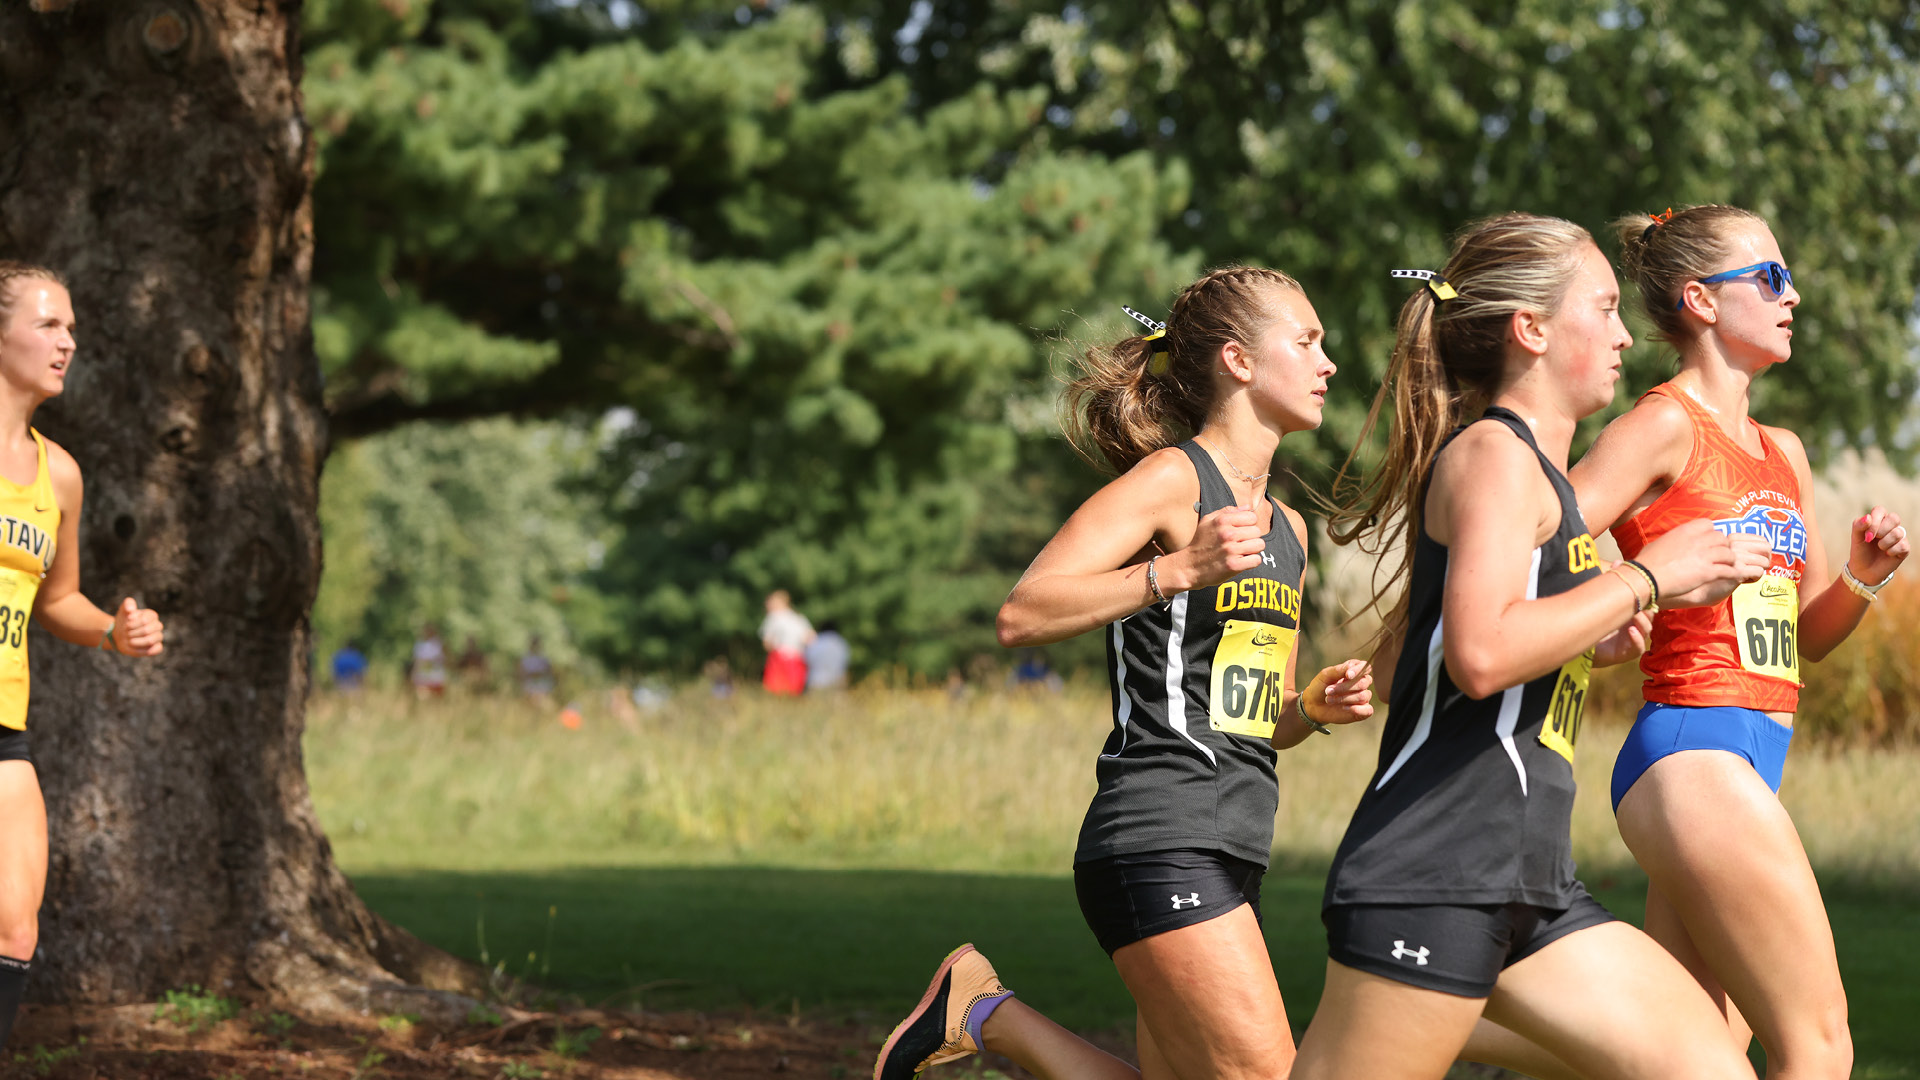 Gracie Buchinger (third from right) led UWO with a third place finish in 24:03.6